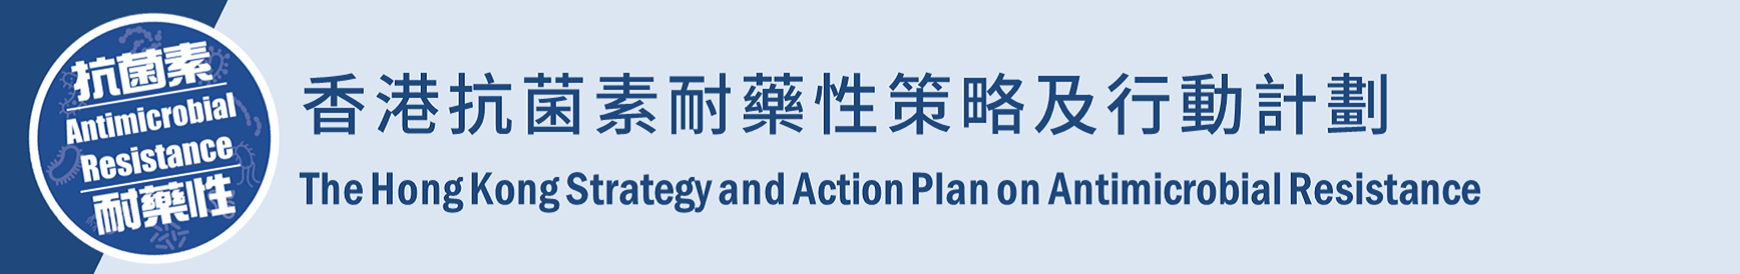 Hong Kong Strategy and Action Plan on Antimicrobial Resistance